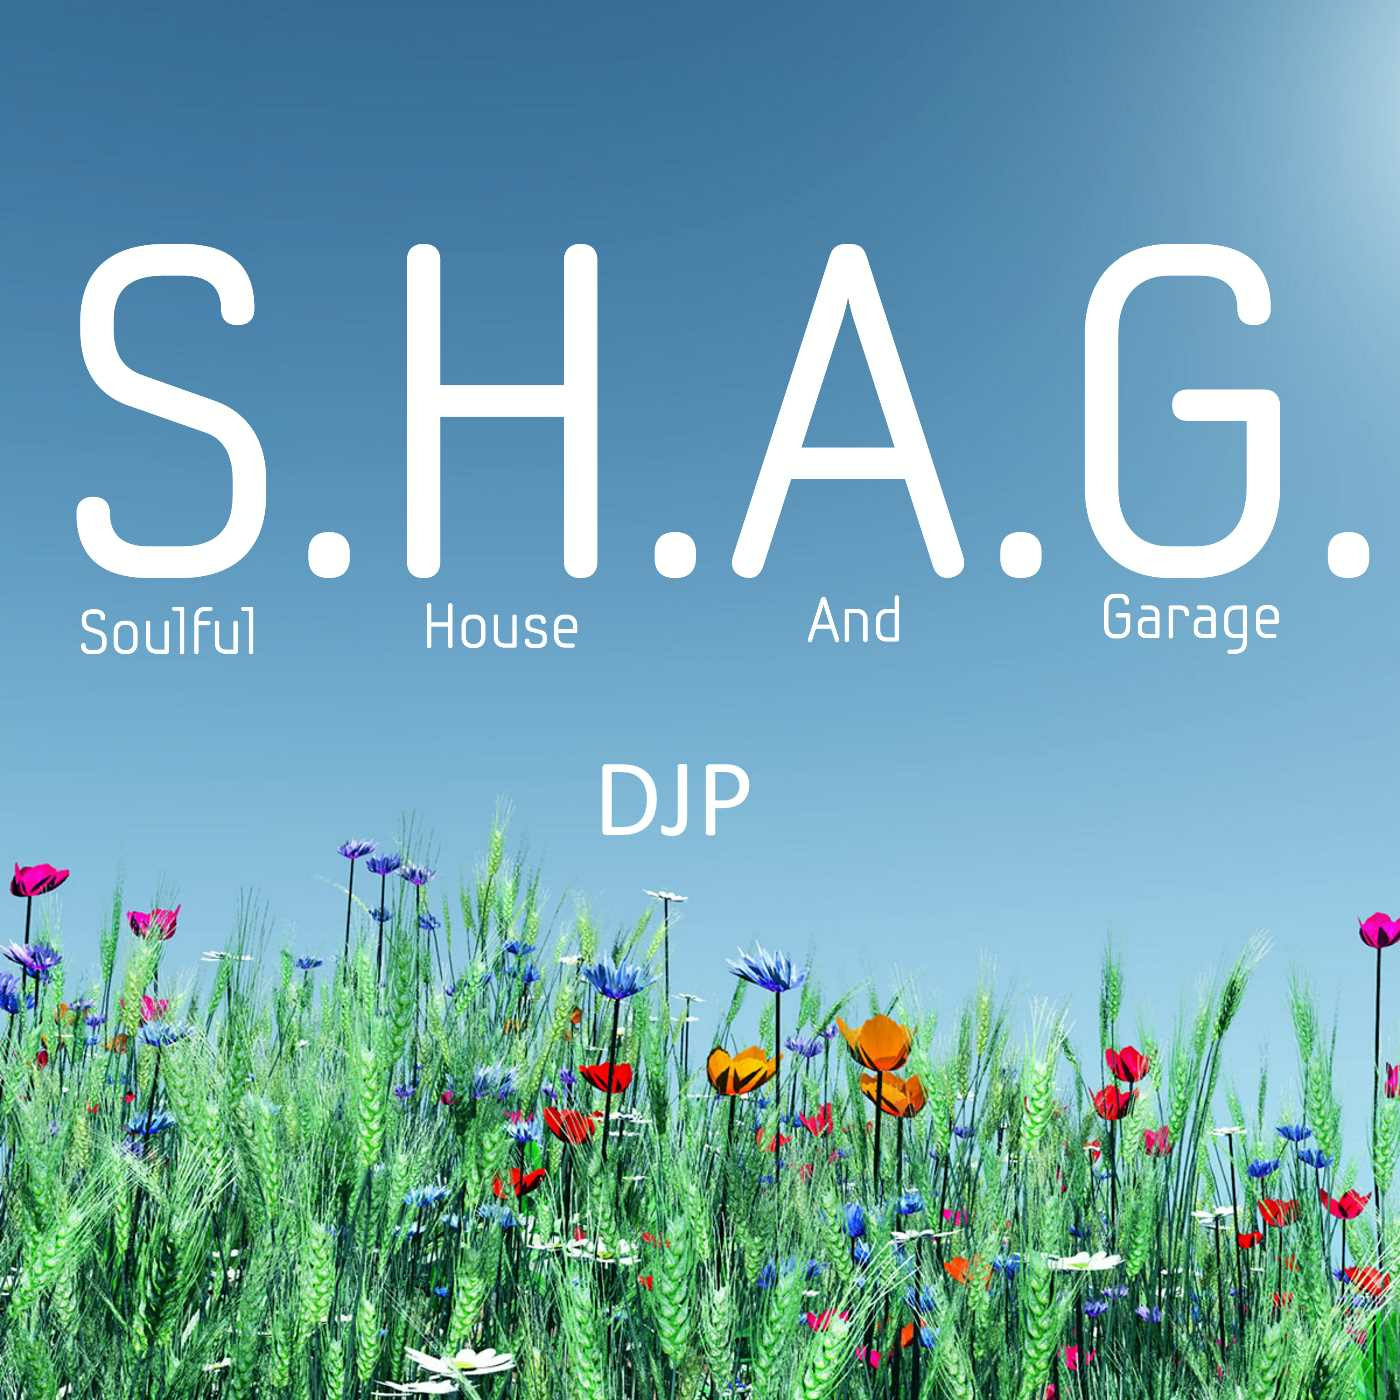 DJP's S.H.A.G. Soulful House And Garage live Radio show on http://PressureRadio.com